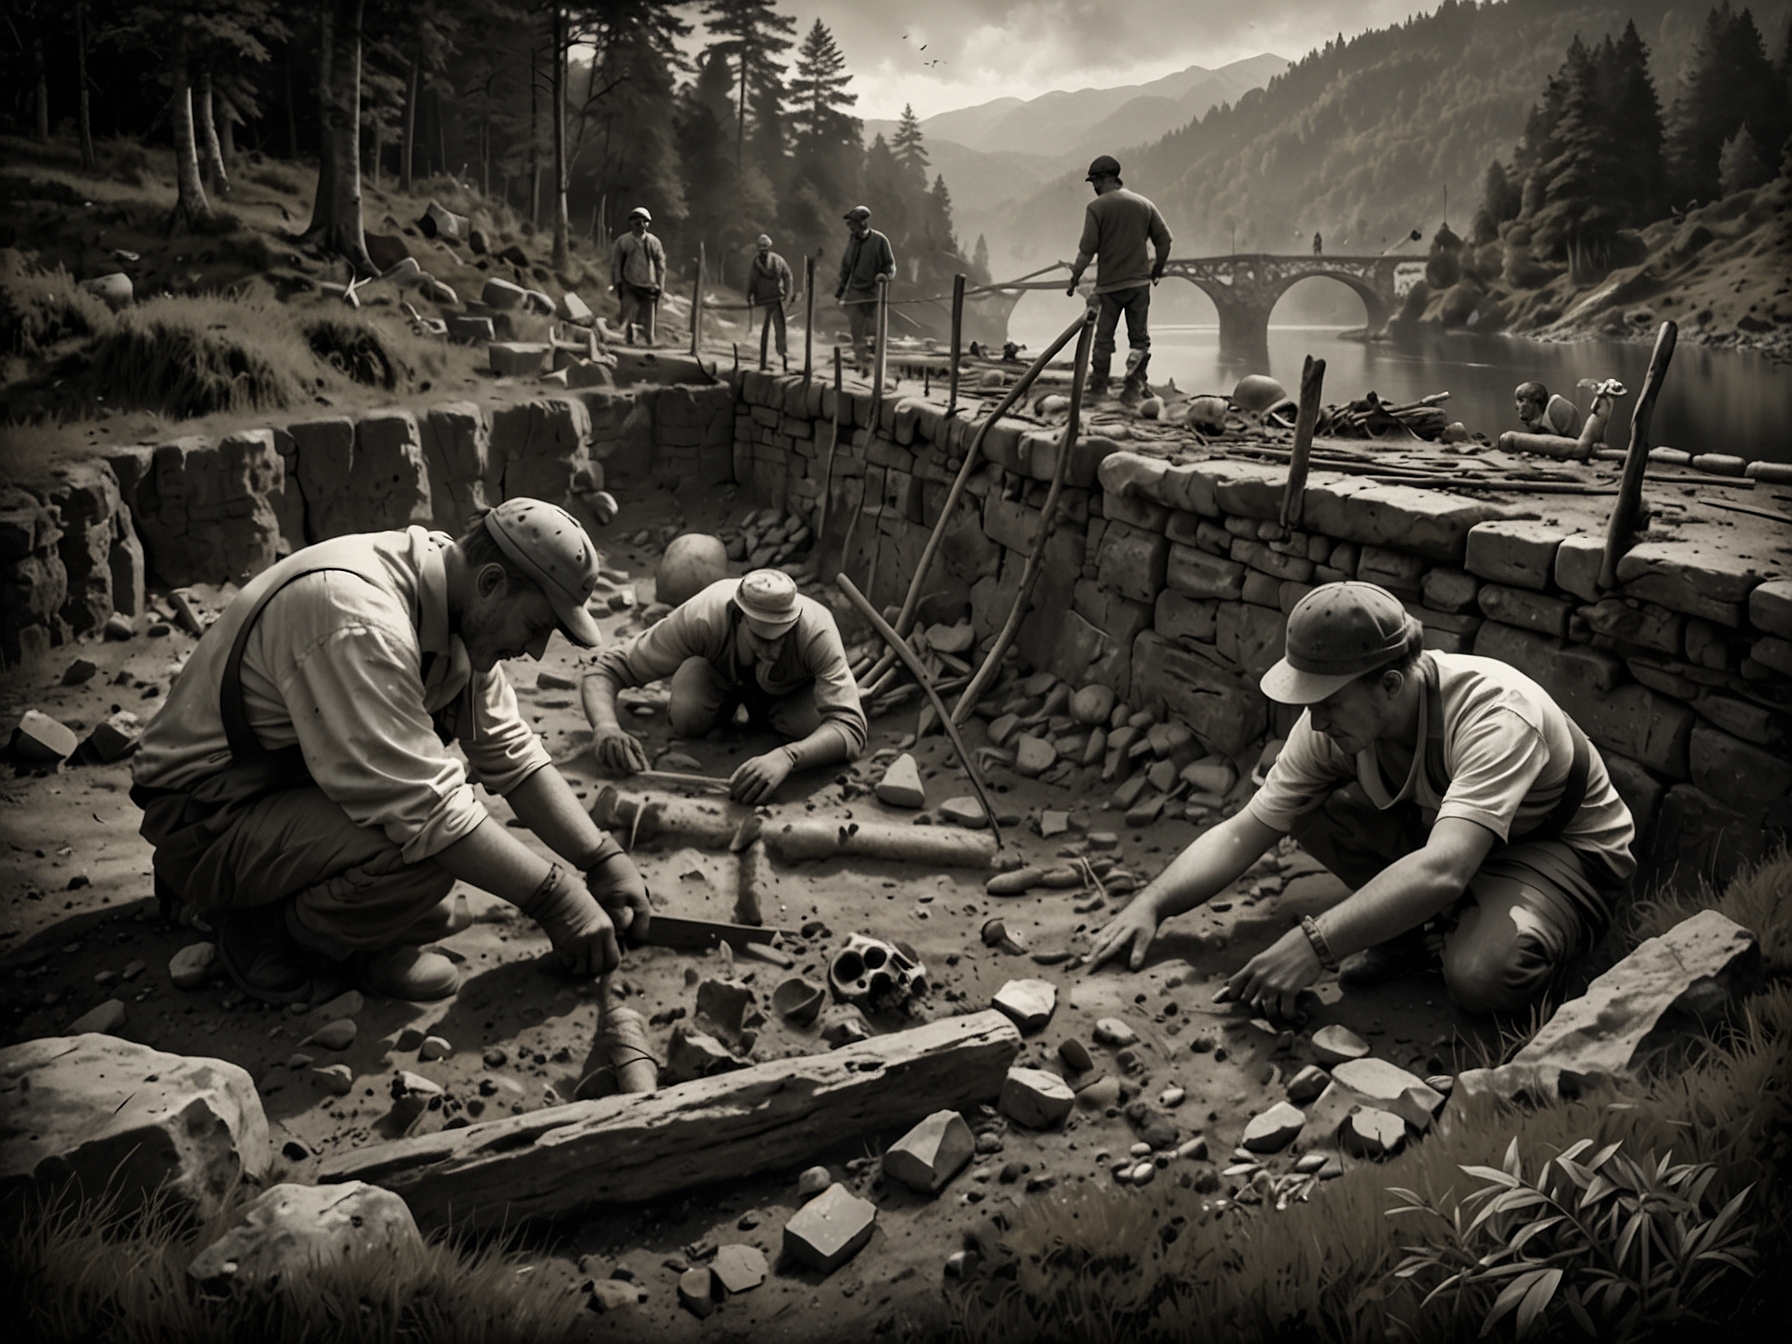 An illustration of archaeologists uncovering Celtic skeletons near the ruins of an ancient bridge in Switzerland's Three Lakes region, depicting the excavation process.